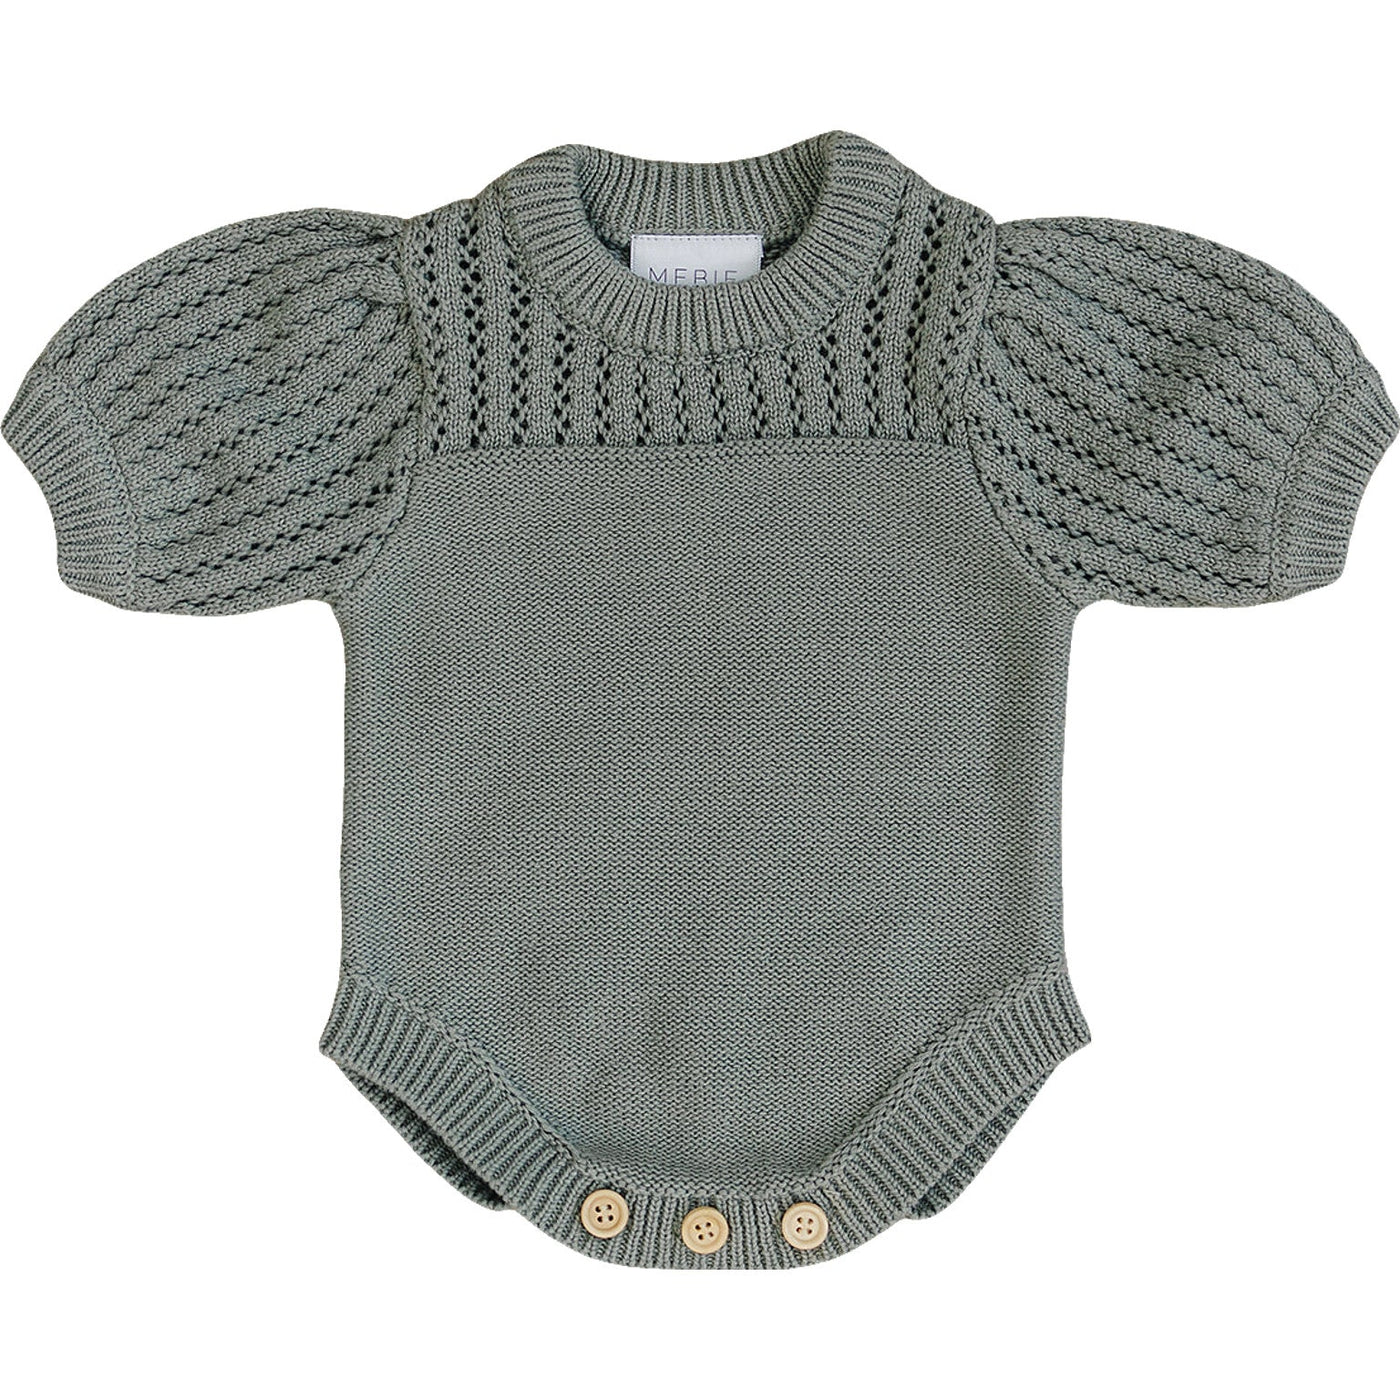 a grey knitted baby bodysuit